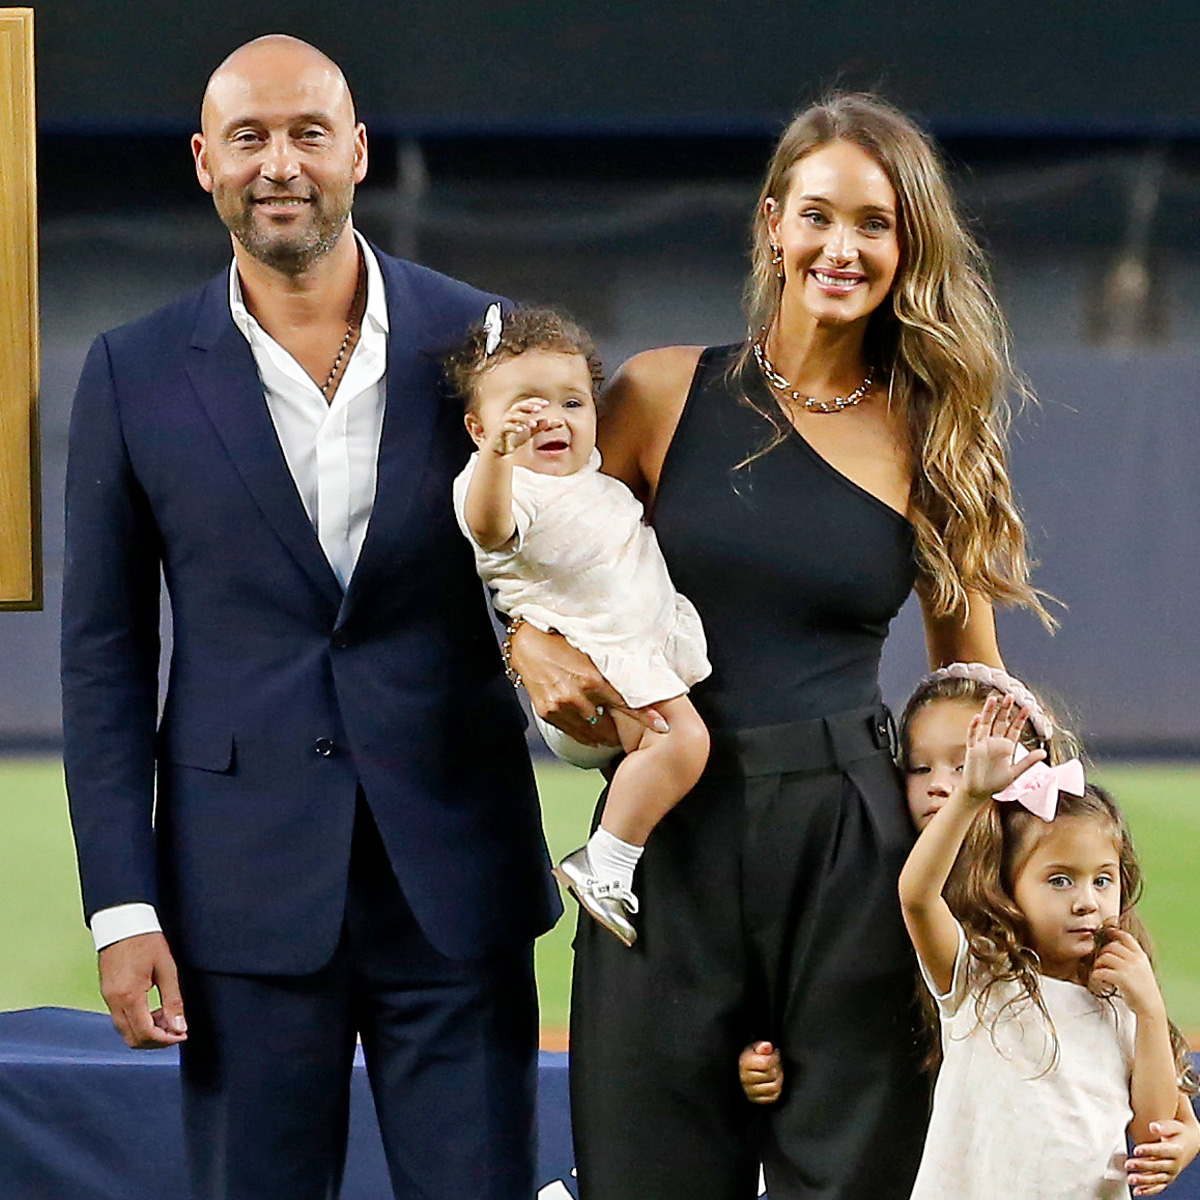 Derek Jeter’s Daughters Join Him at Hall of Fame Induction Ceremony